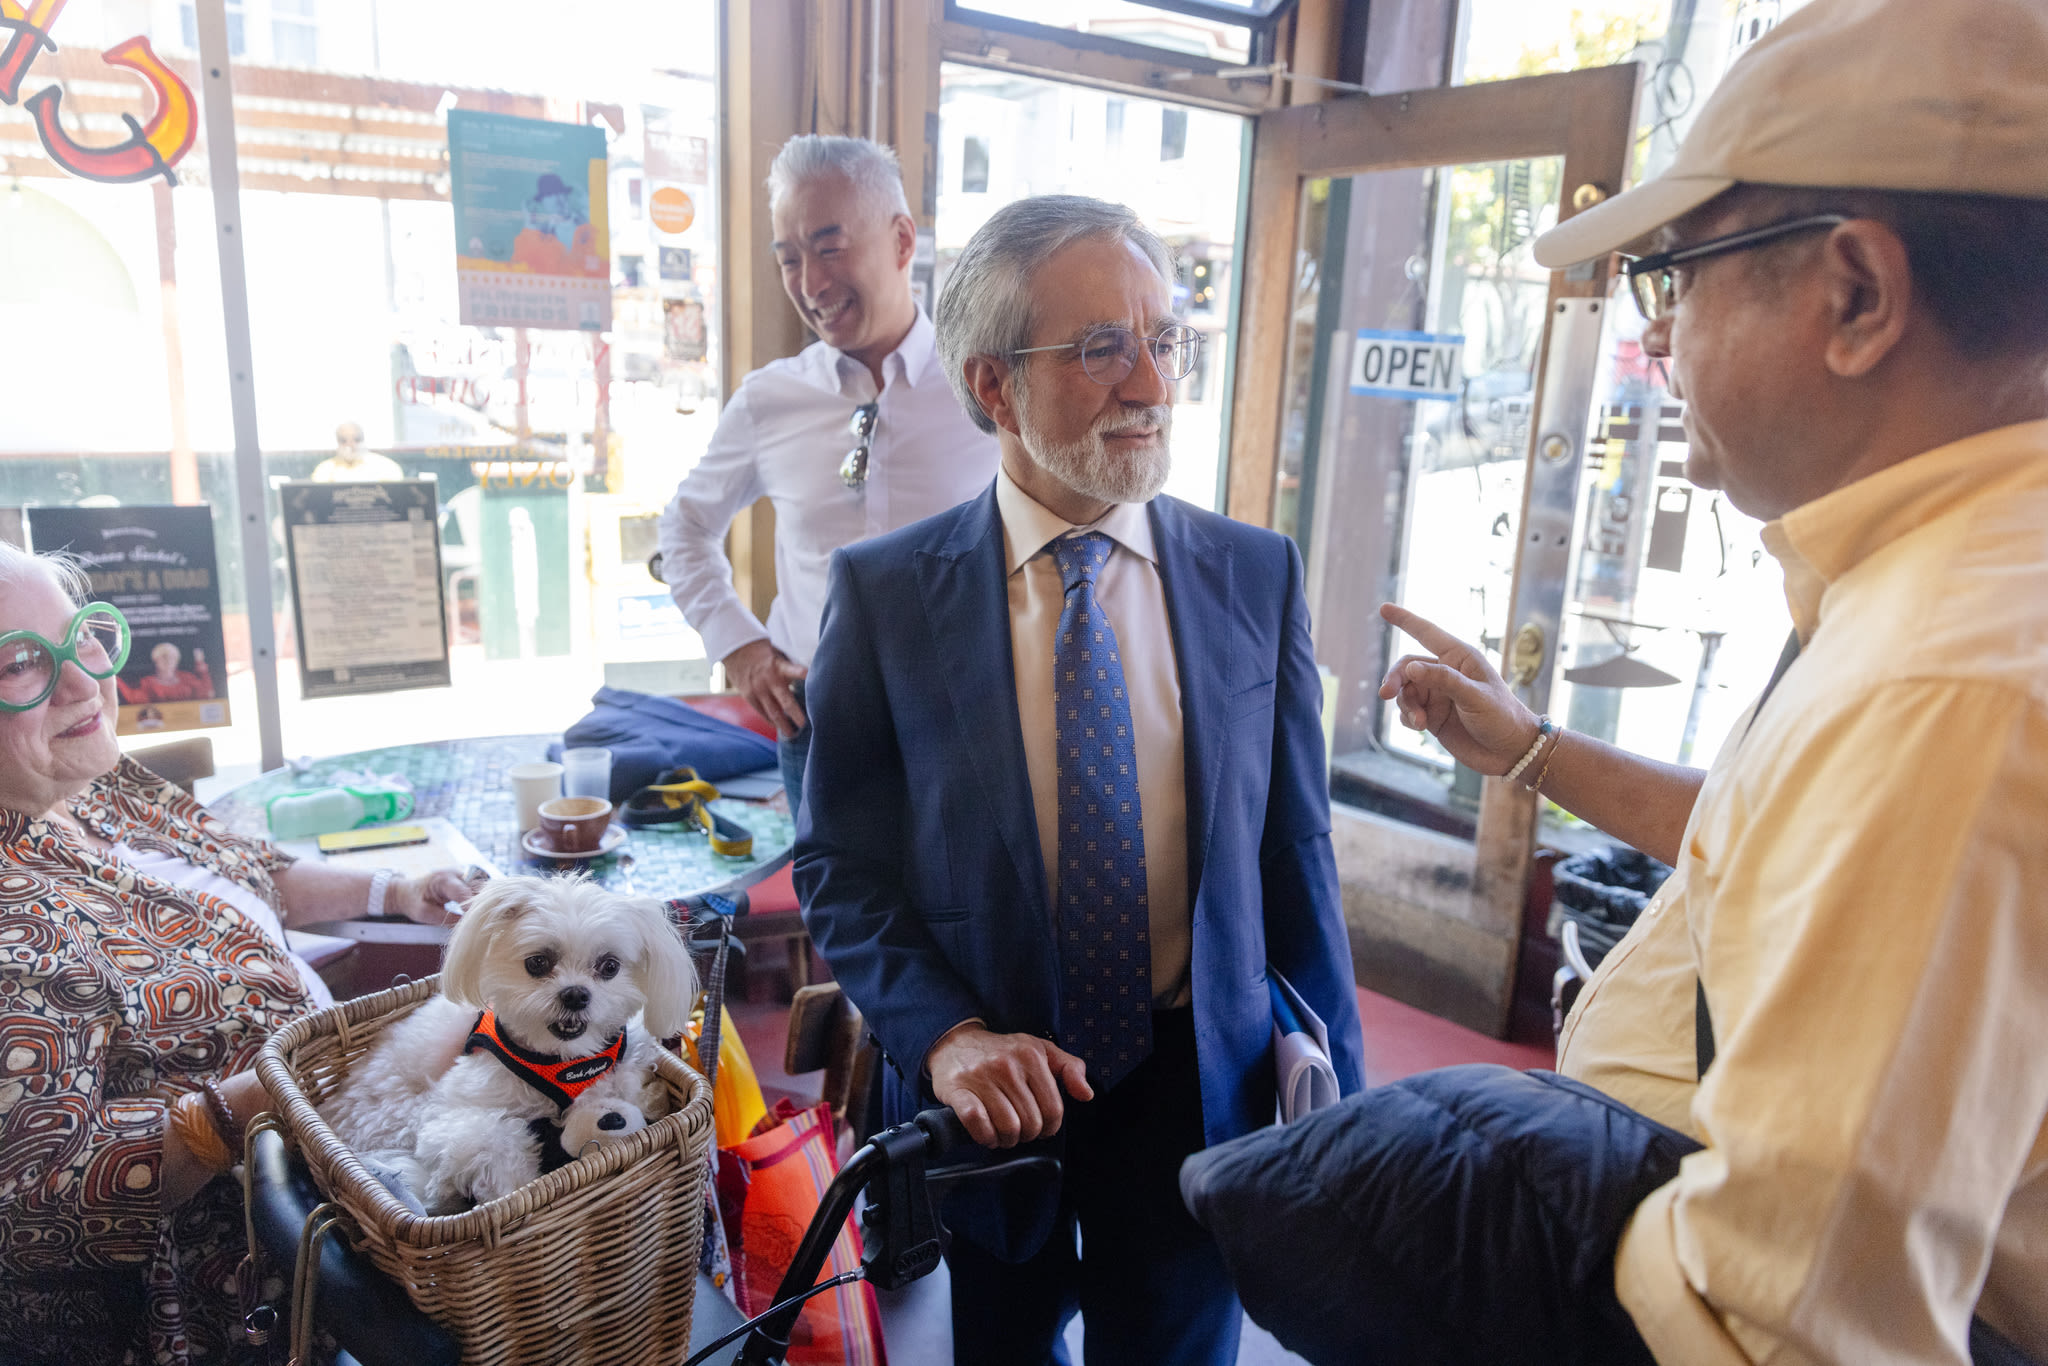 'Pain in the ass': Aaron Peskin, revered and reviled, could be SF's next mayor